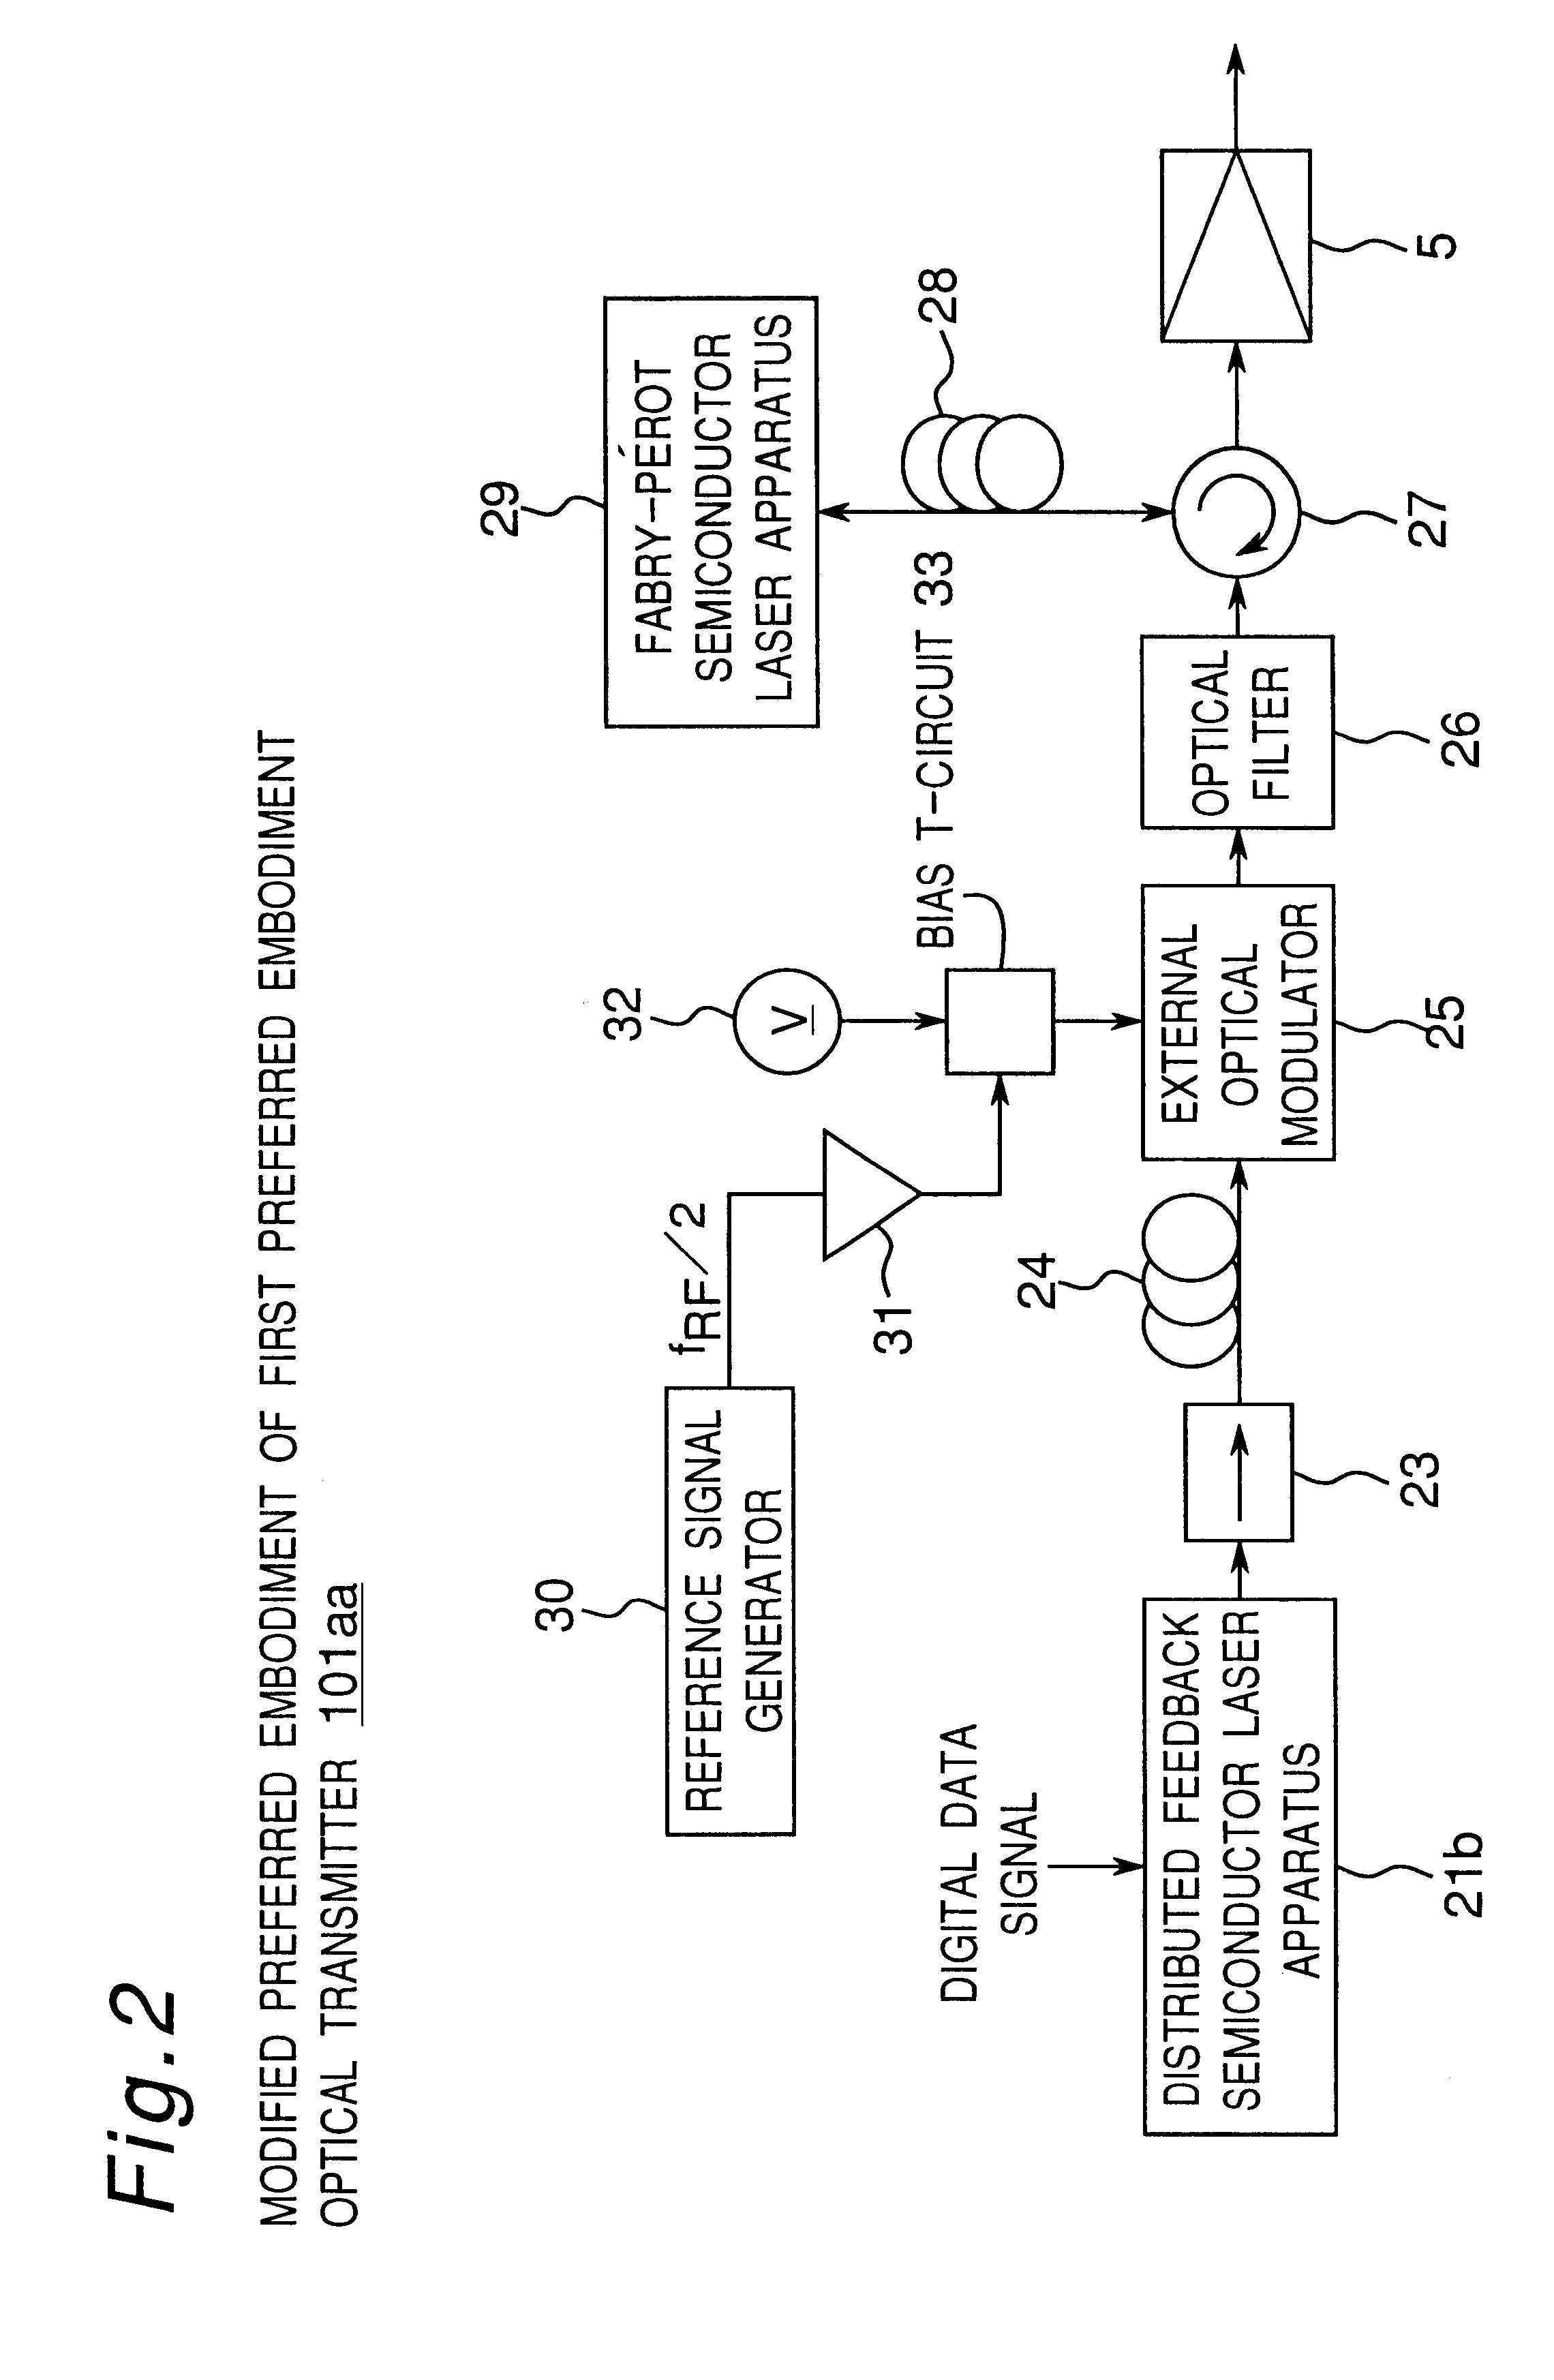 Two-optical signal generator for generating two optical signals having adjustable optical frequency difference